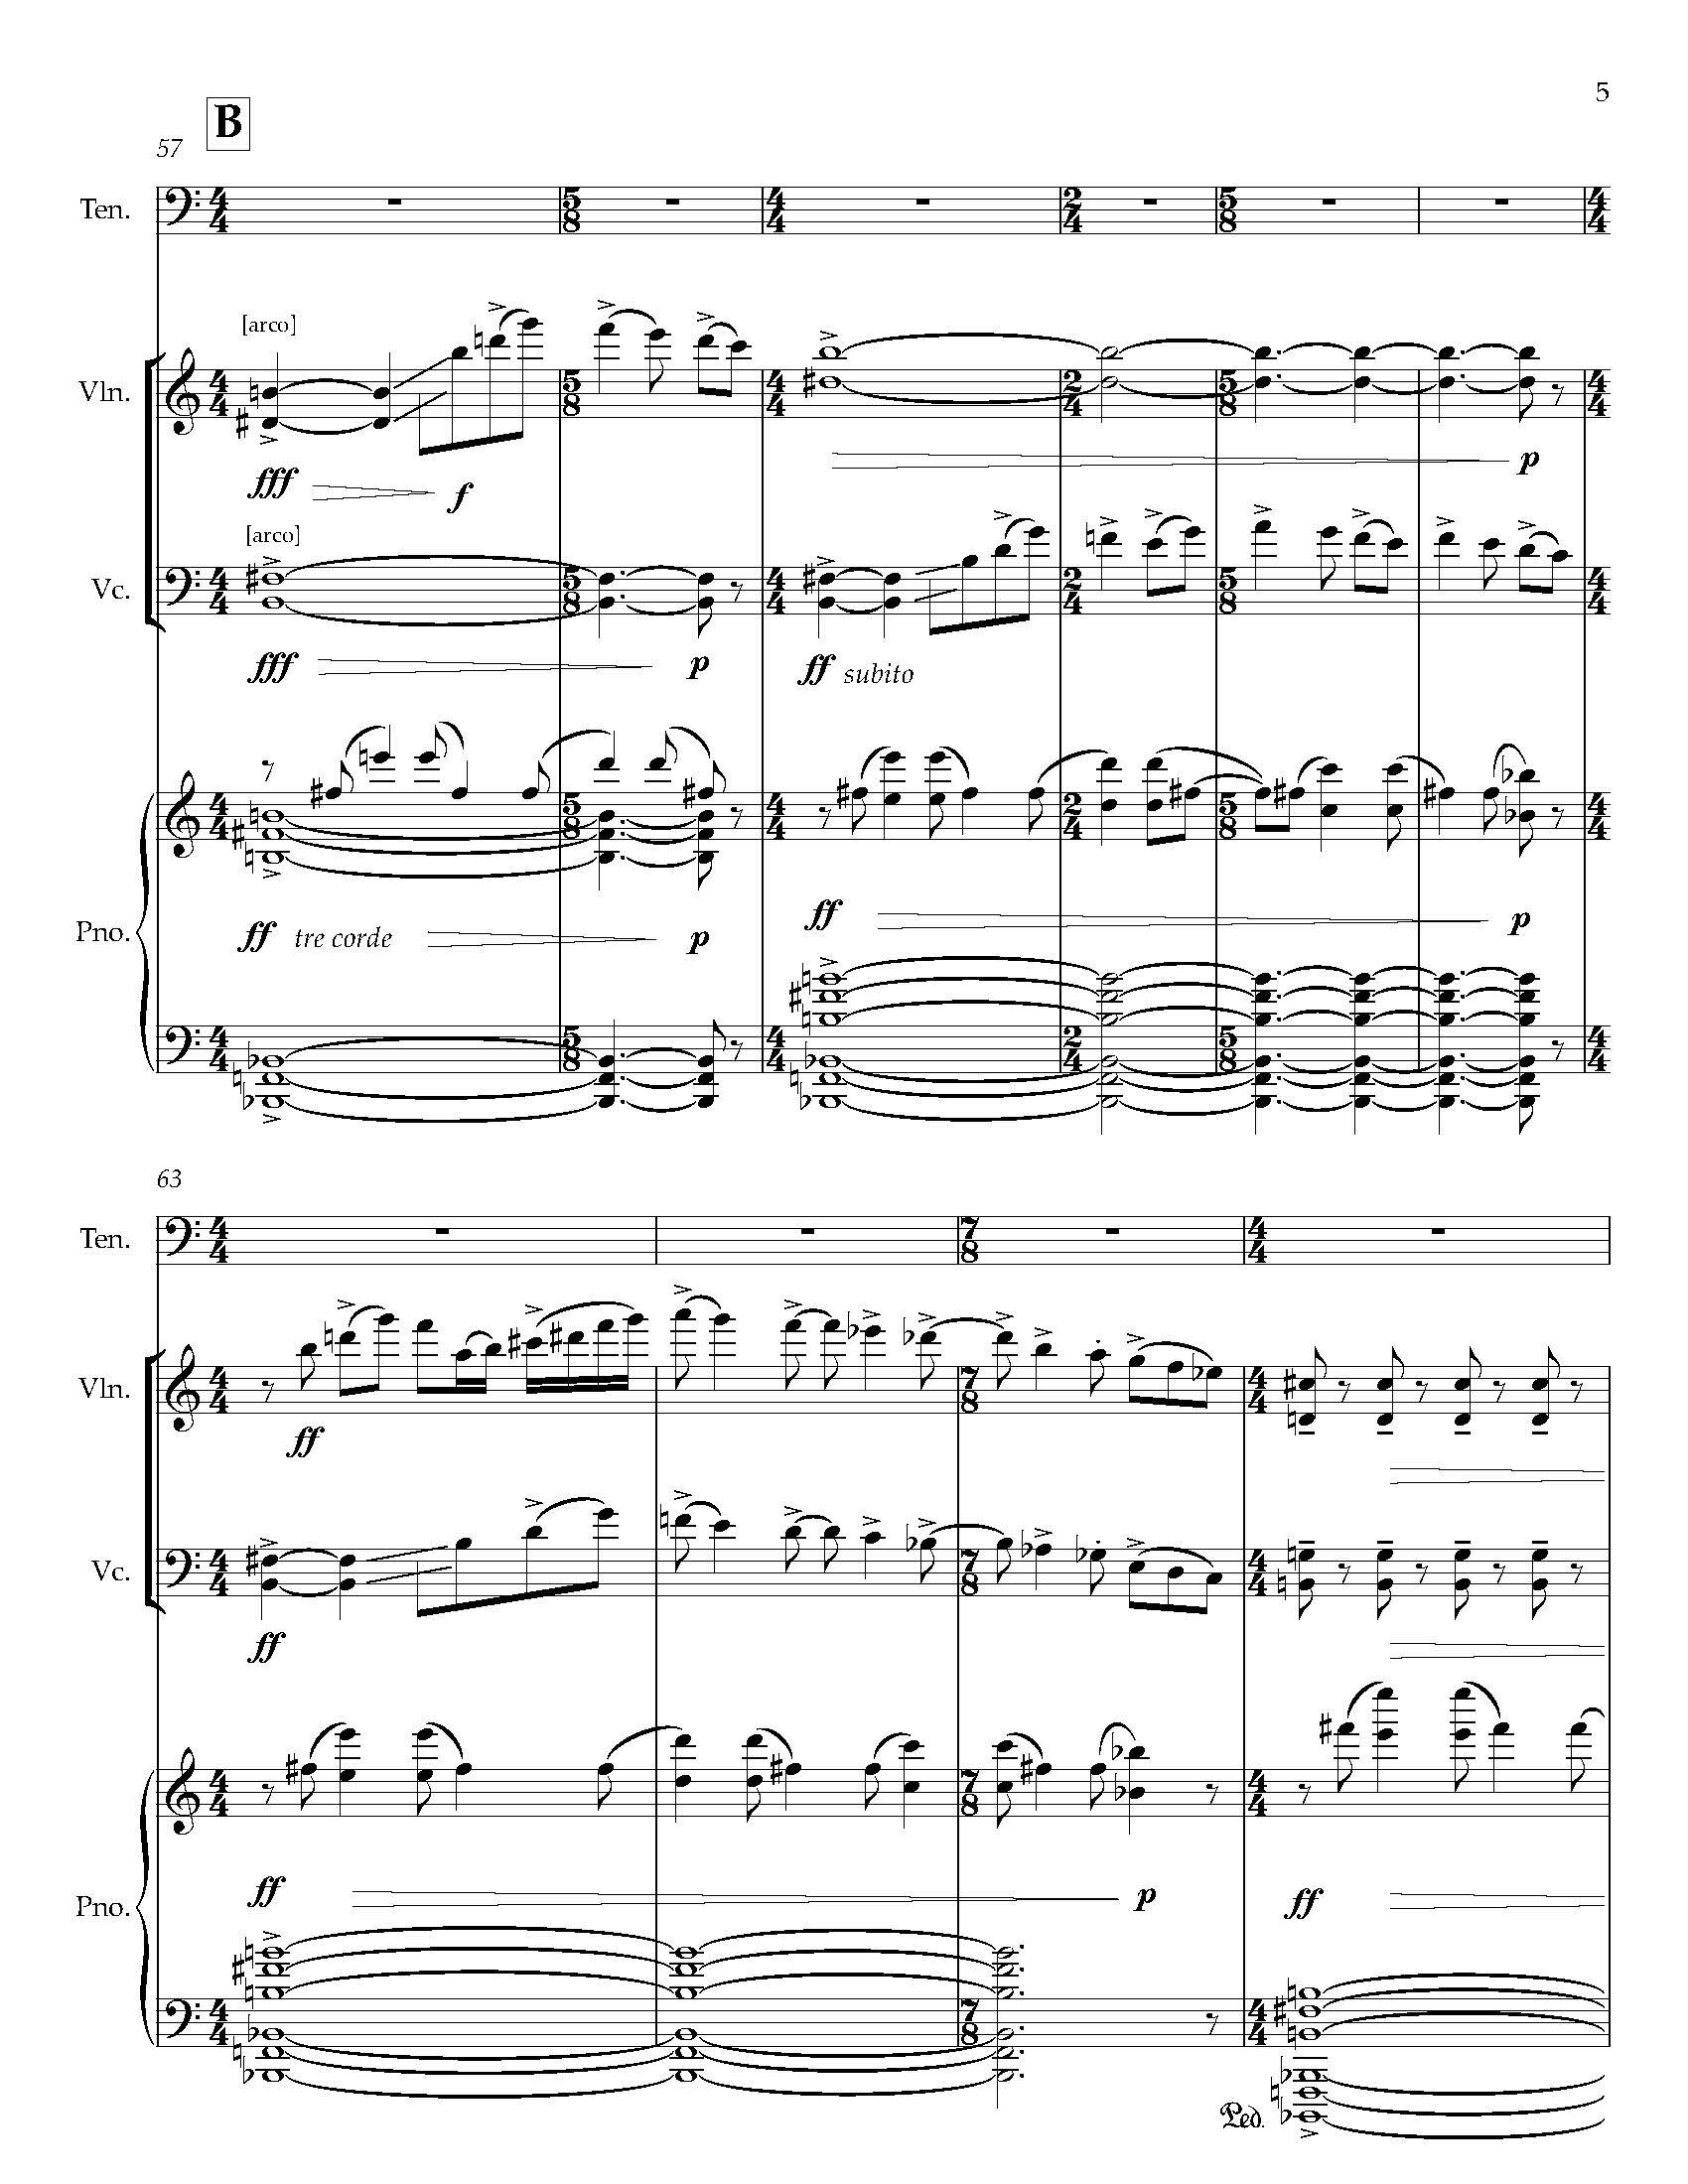 Gursky Songs - Complete Score_Page_13.jpg